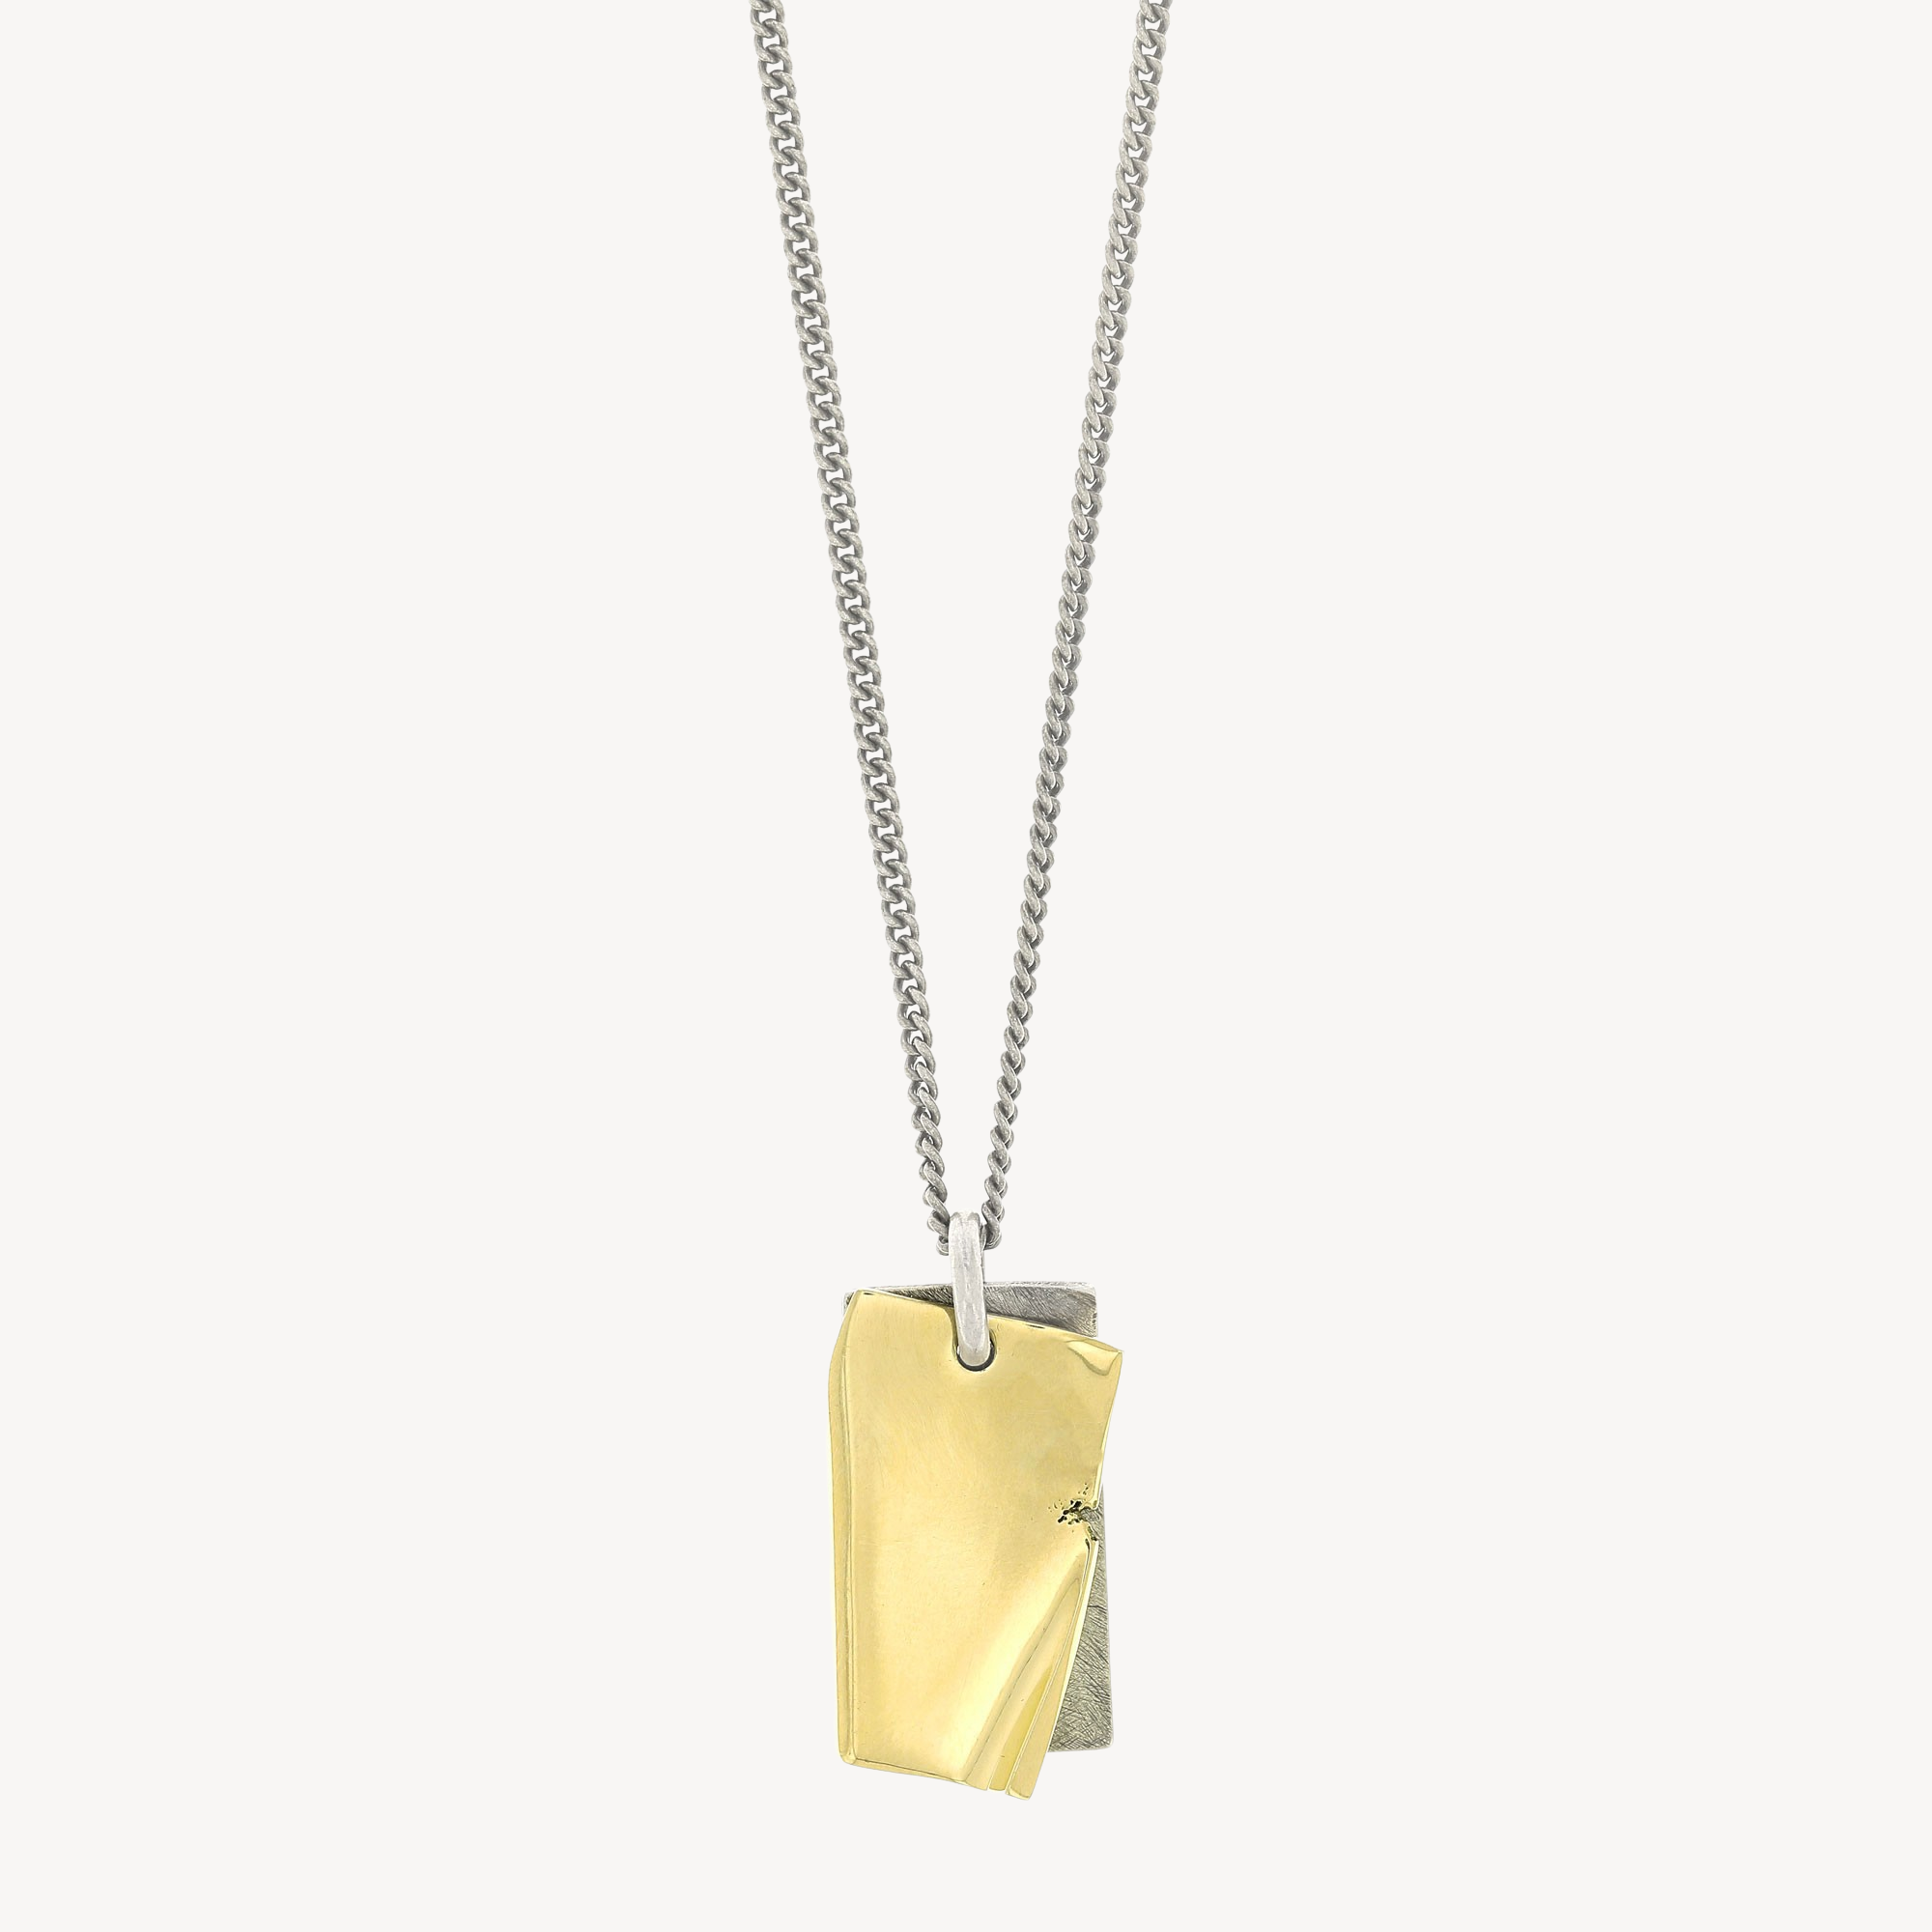 Gold Folded Age Necklace